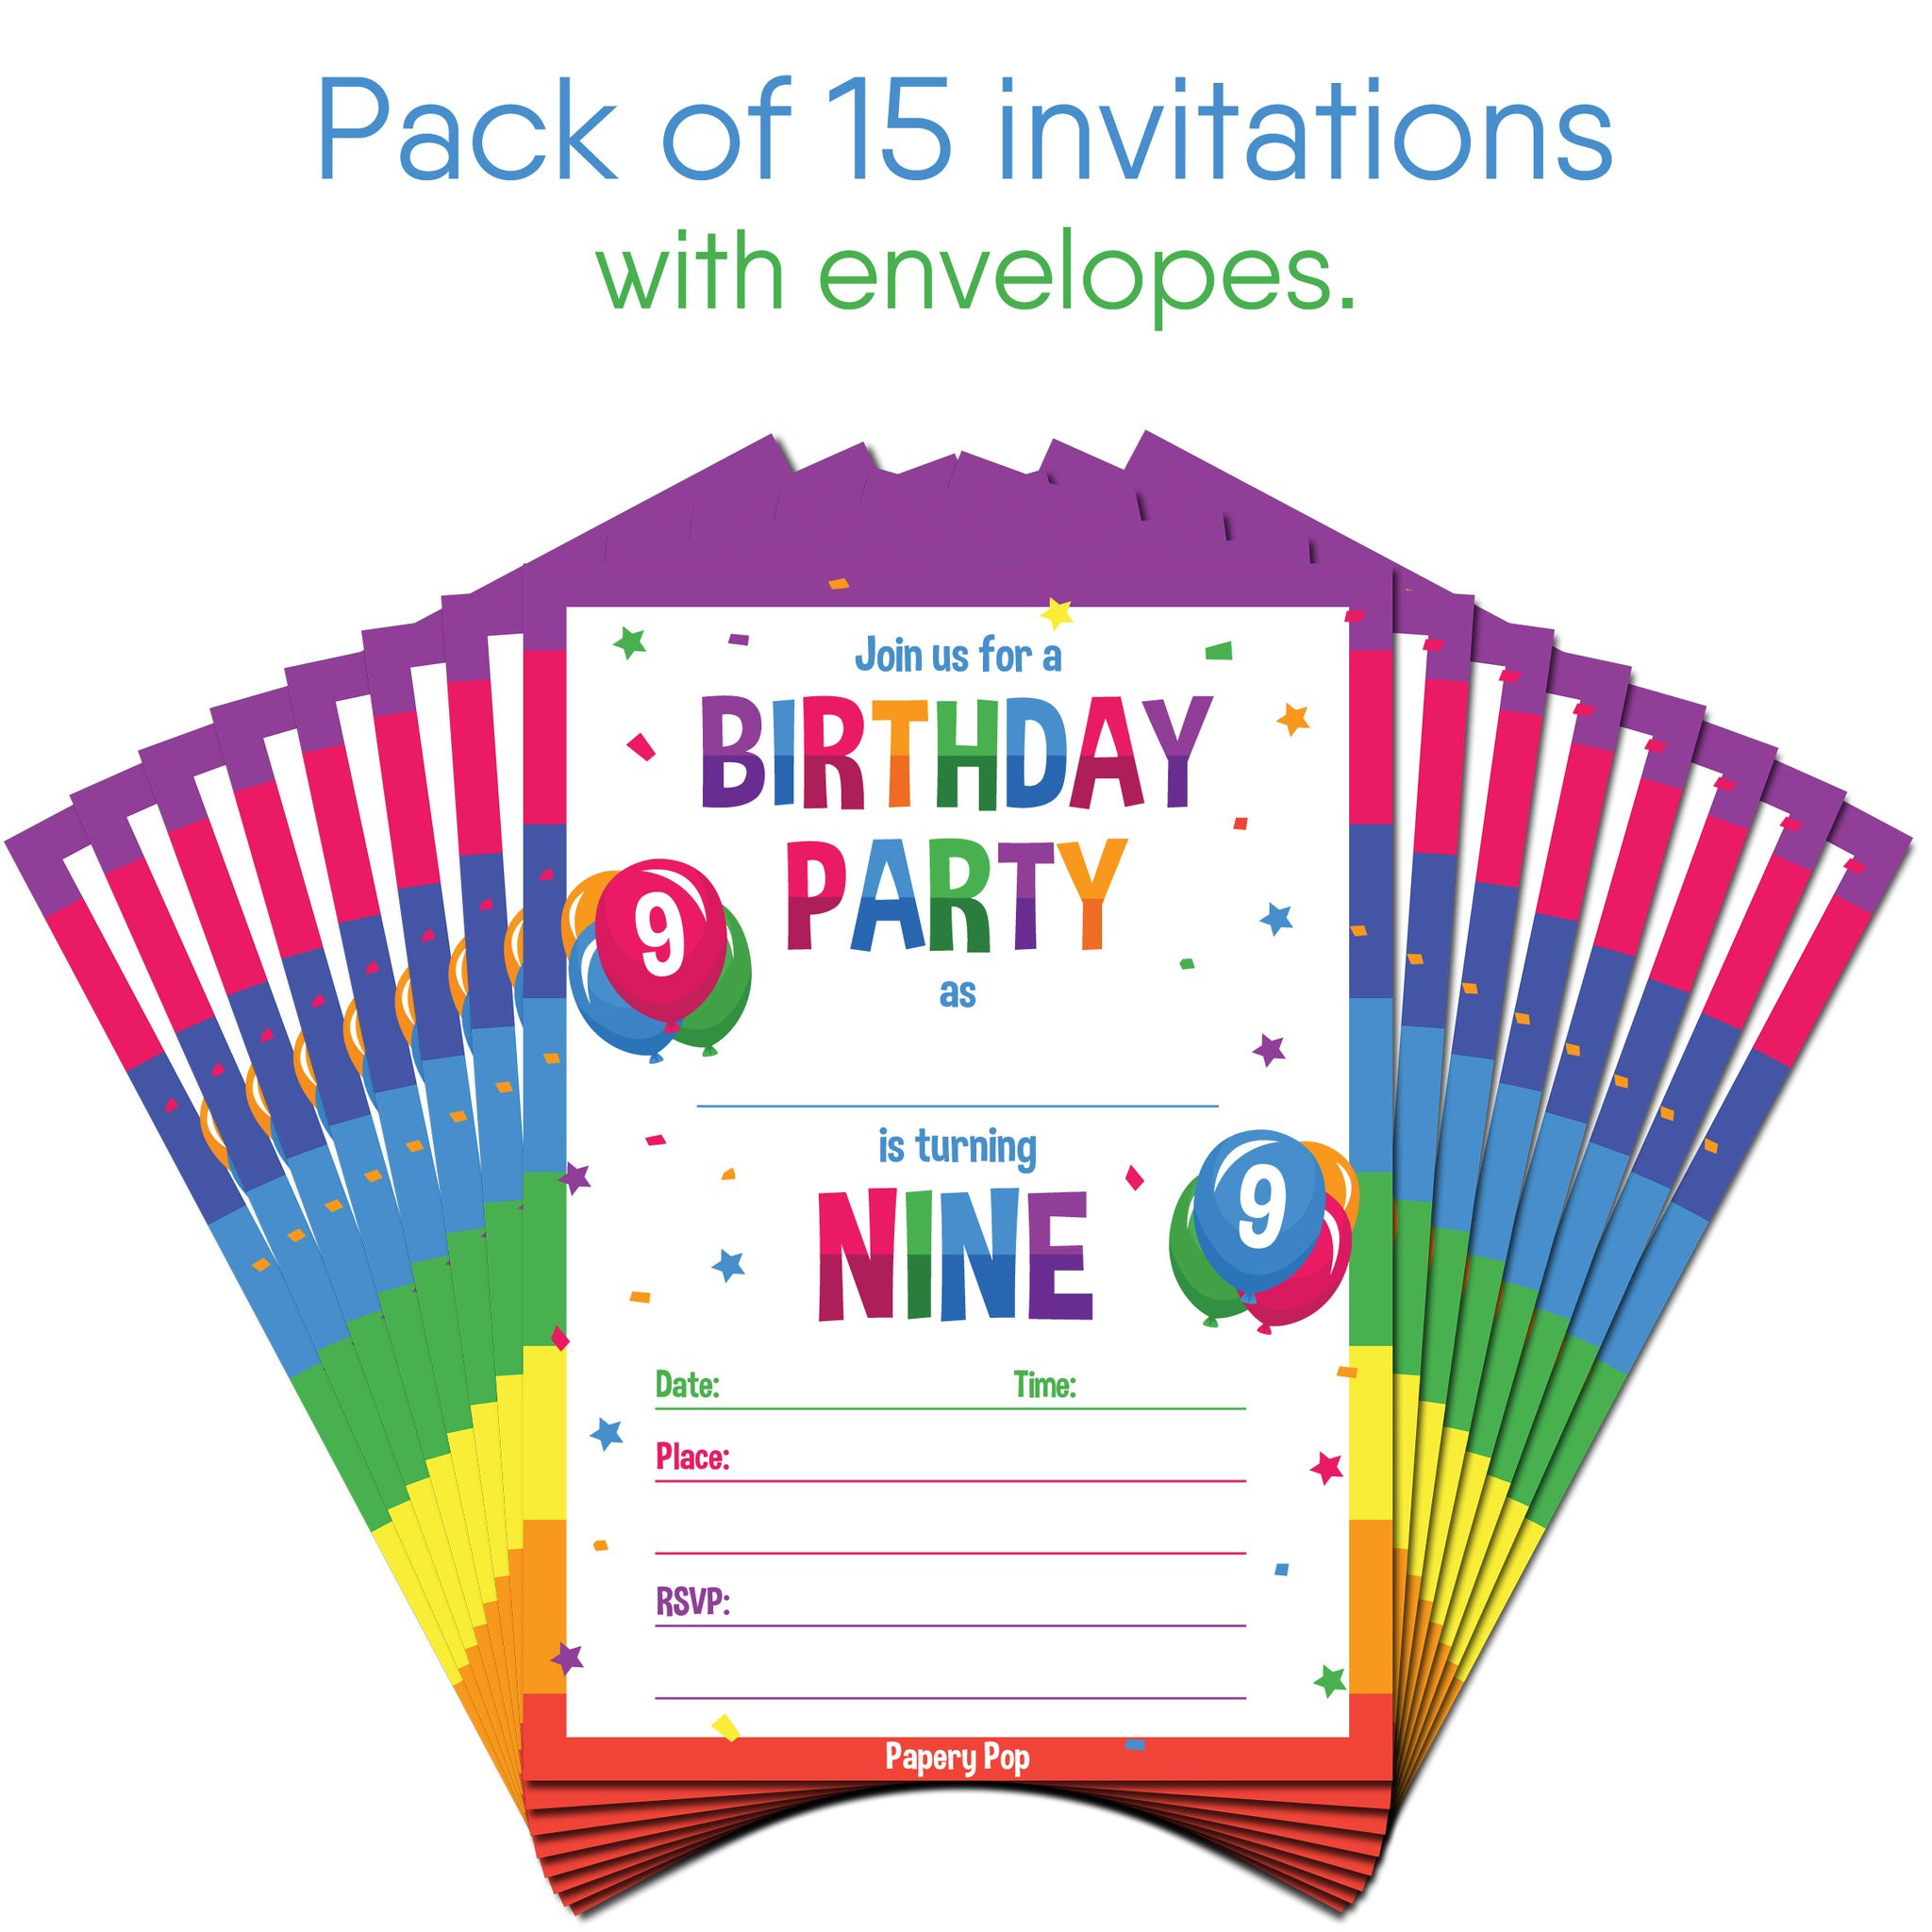 9 Year Old Birthday Party
 9 Year Old Birthday Party Invitations with Envelopes 15